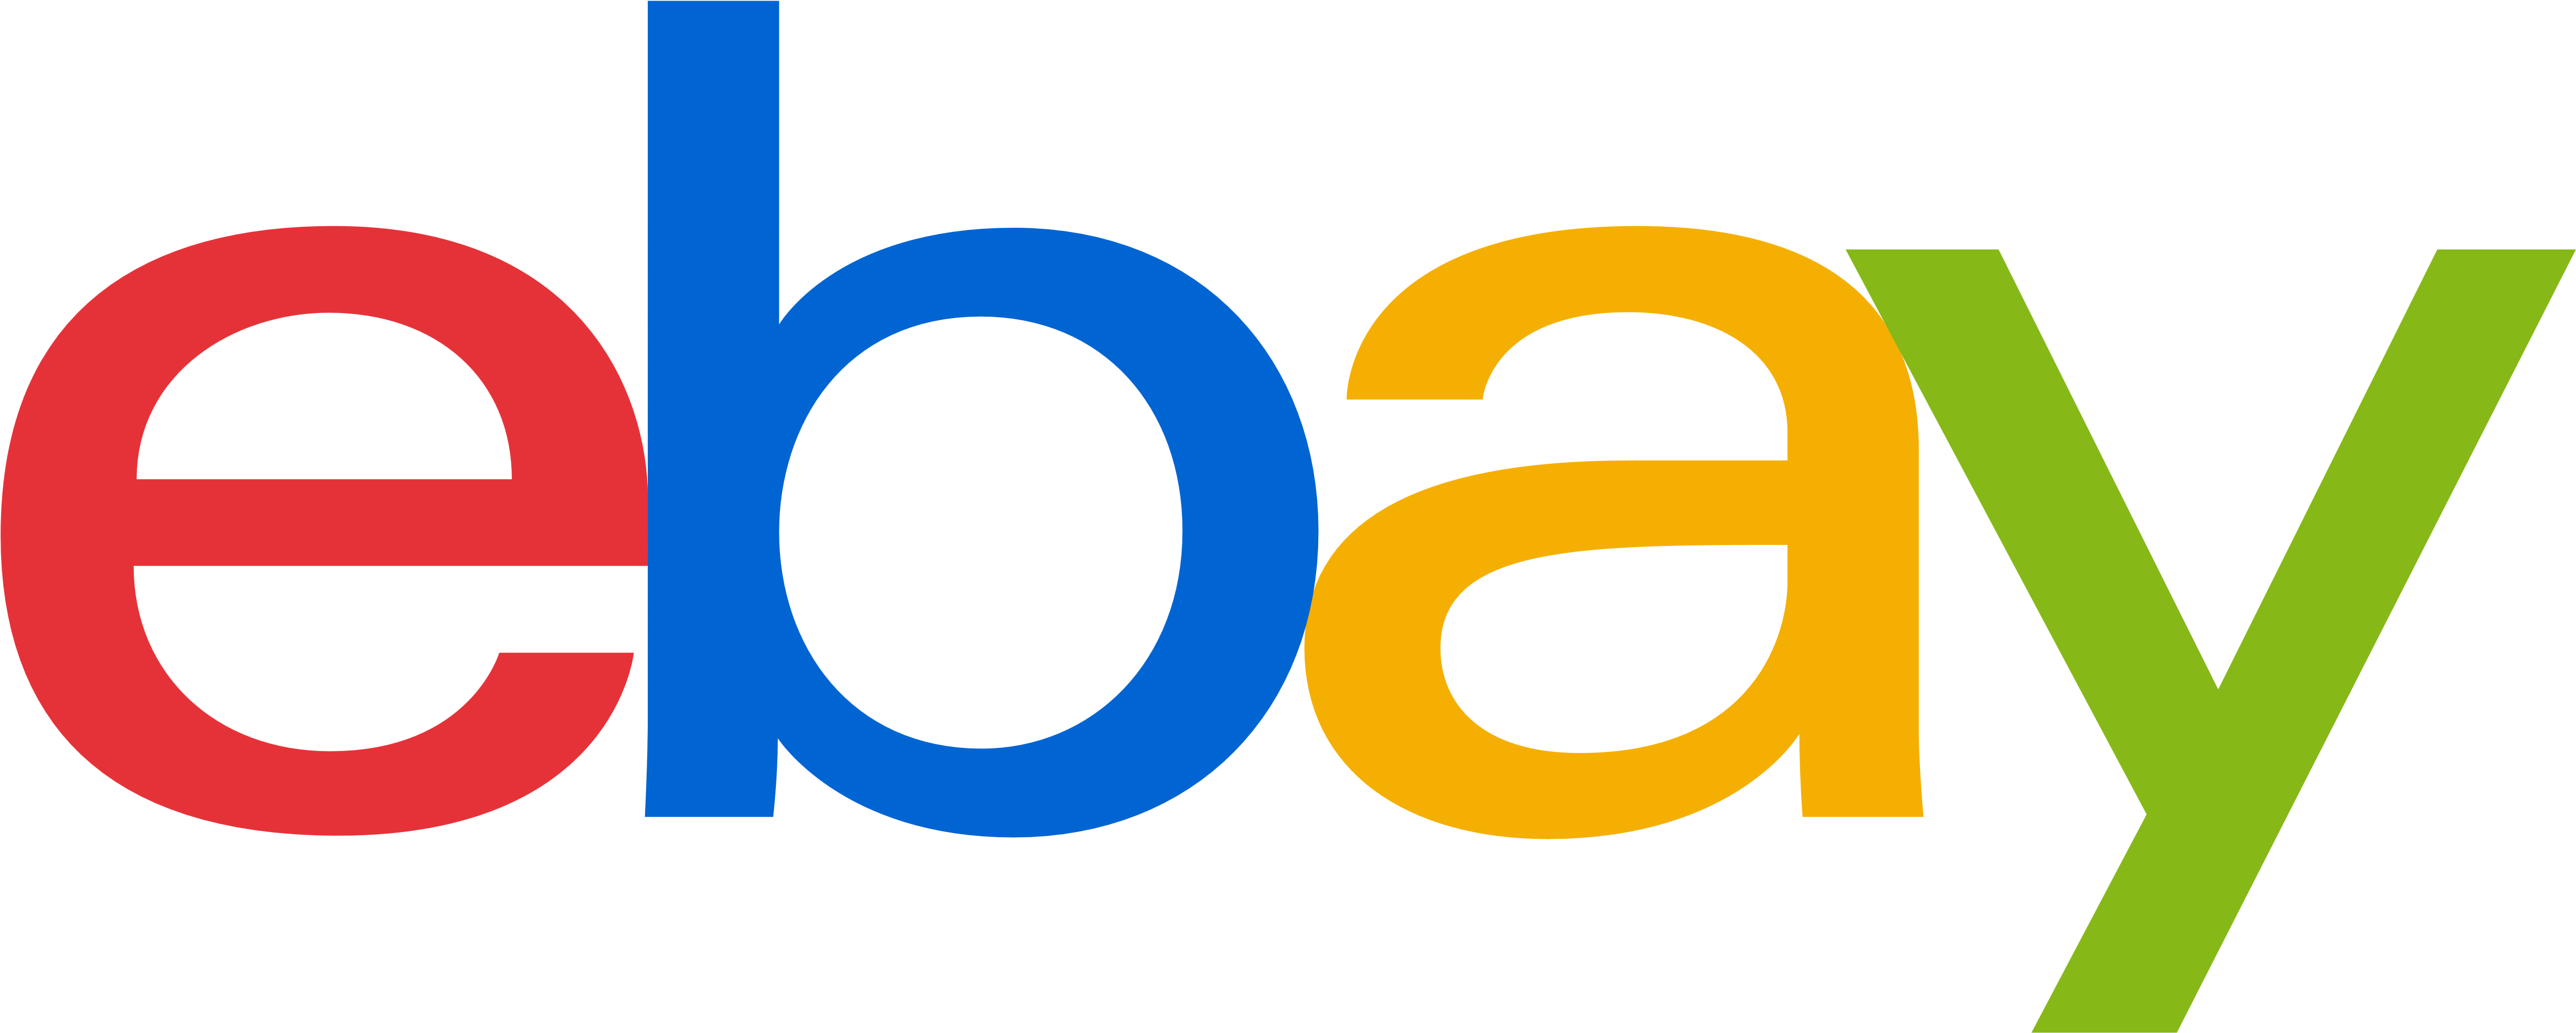 A Word Mark Is A Acronym Or Company Name That Is Free - Ebay Logo Png (5000x2000)